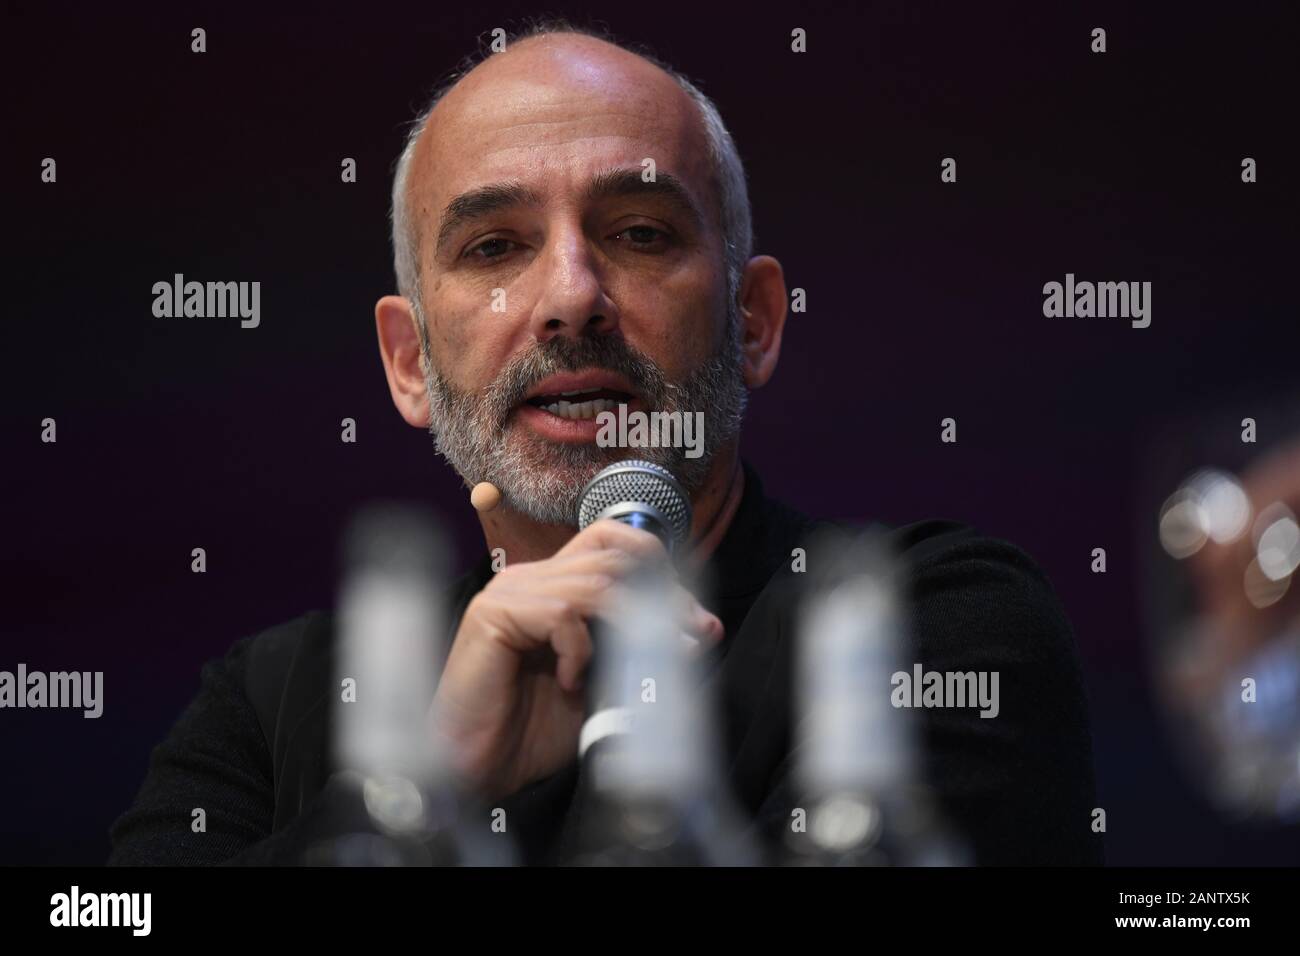 19 January 2020, Bavaria, Munich: Gadi Amit (President, Principal Designer & Owner of NewDealDesign LLC) during the panel discussion at DLD Munich Conference 2020, Europe’s big innovation conference, Alte Kongresshalle, Munich, January 18– 20, 2020 Picture Alliance for DLD / Hubert Burda Media | usage worldwide Stock Photo